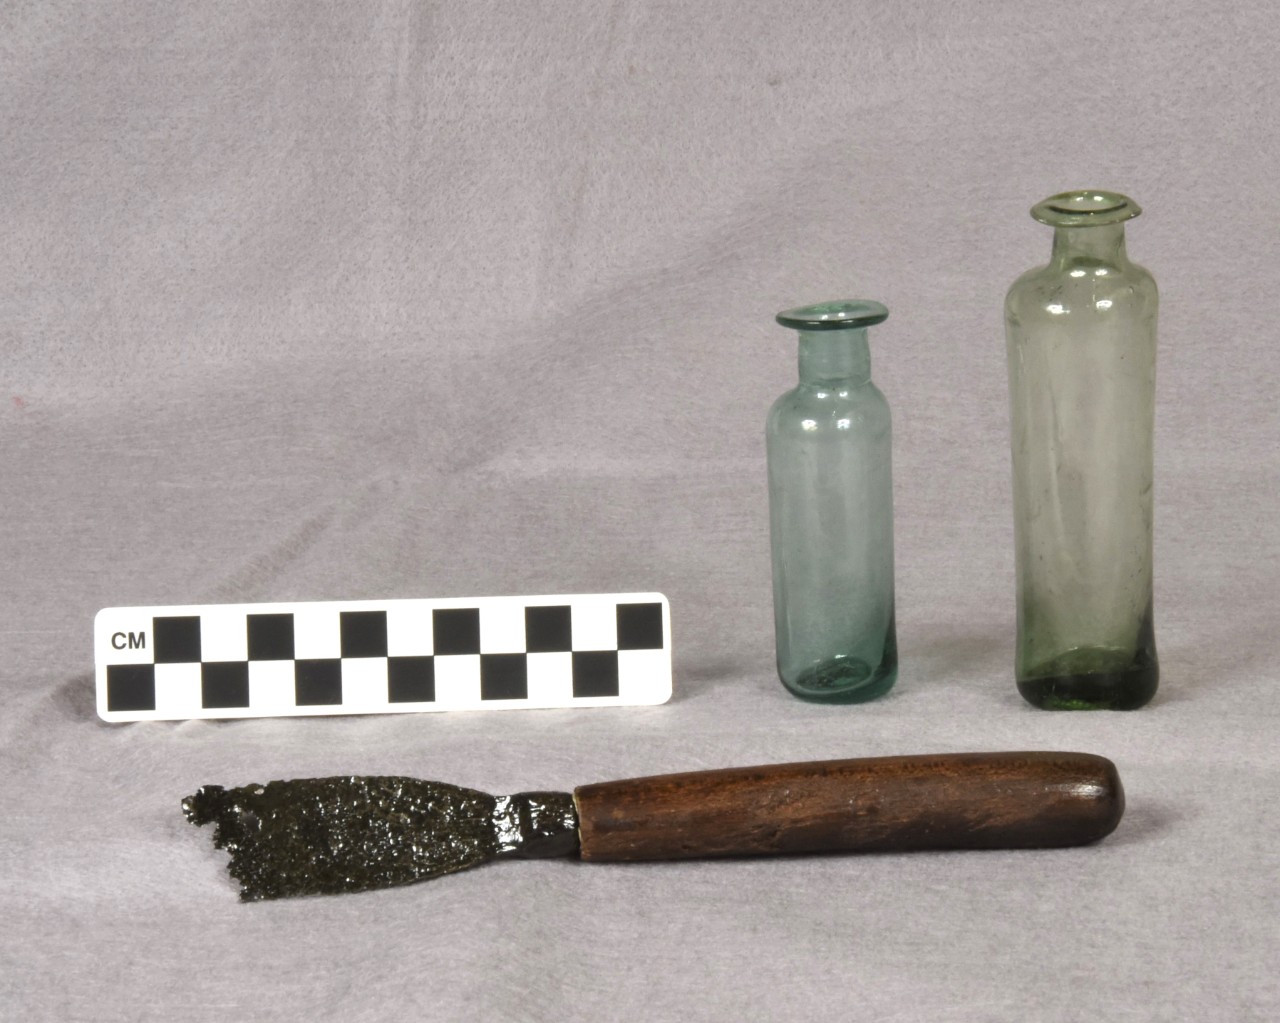 Color image of two small glass bottles with narrow necks and flared rims, and an iron and wood spatula, along with a metric scale that indicates that bottles are approximately 8 and 11 centimeters high.